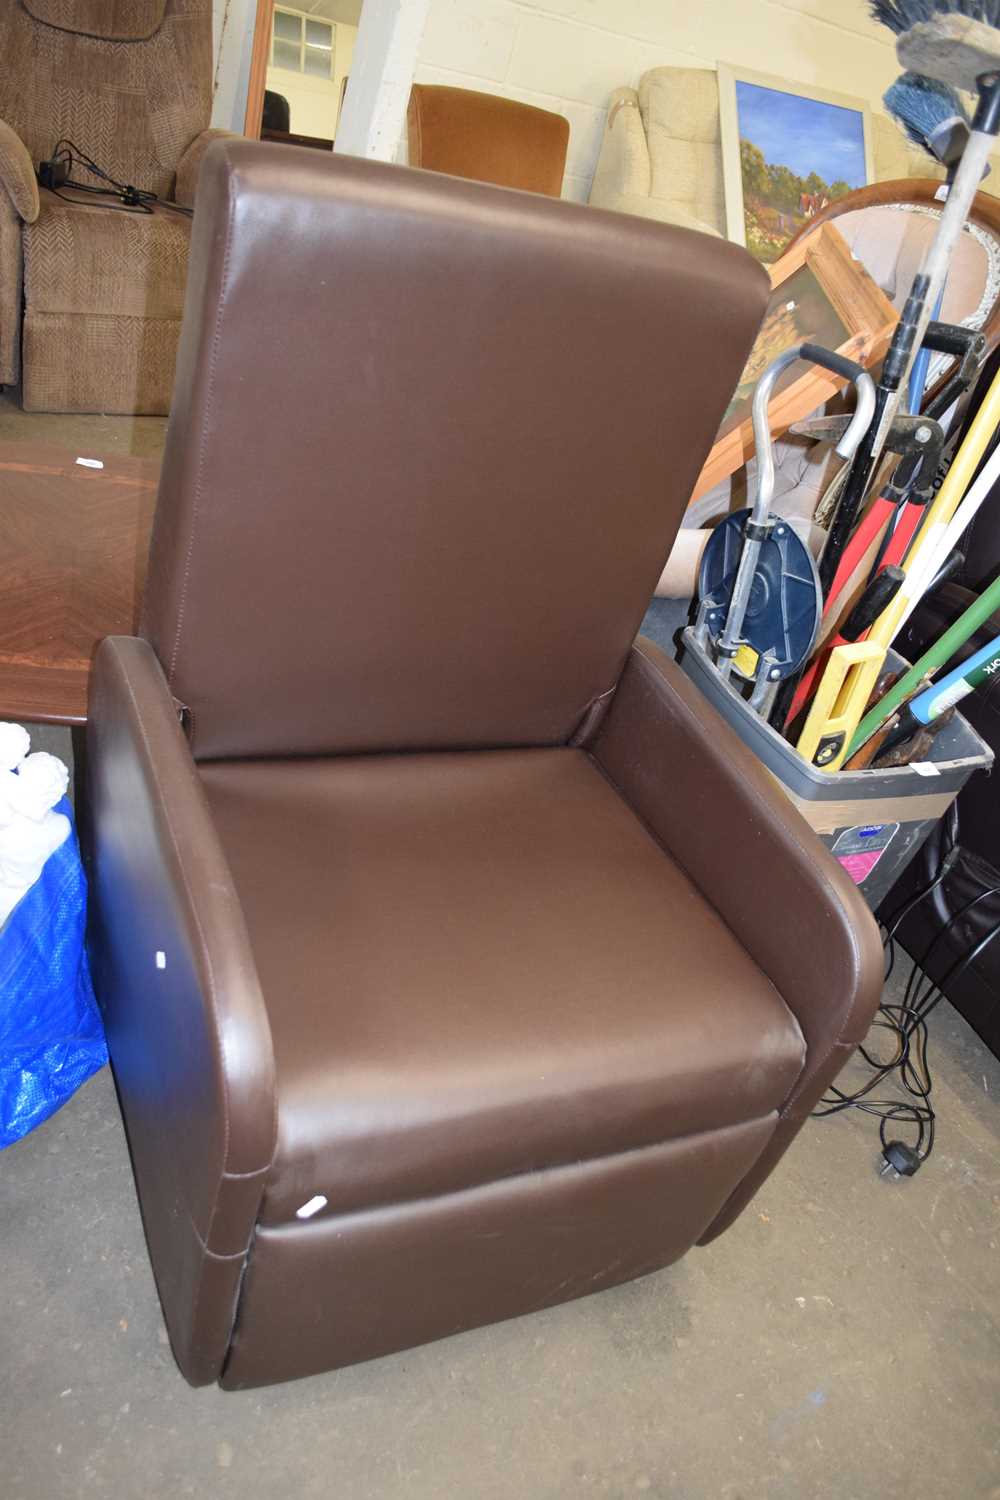 FOLDING BROWN LEATHERETTE ARMCHAIR - Image 2 of 2